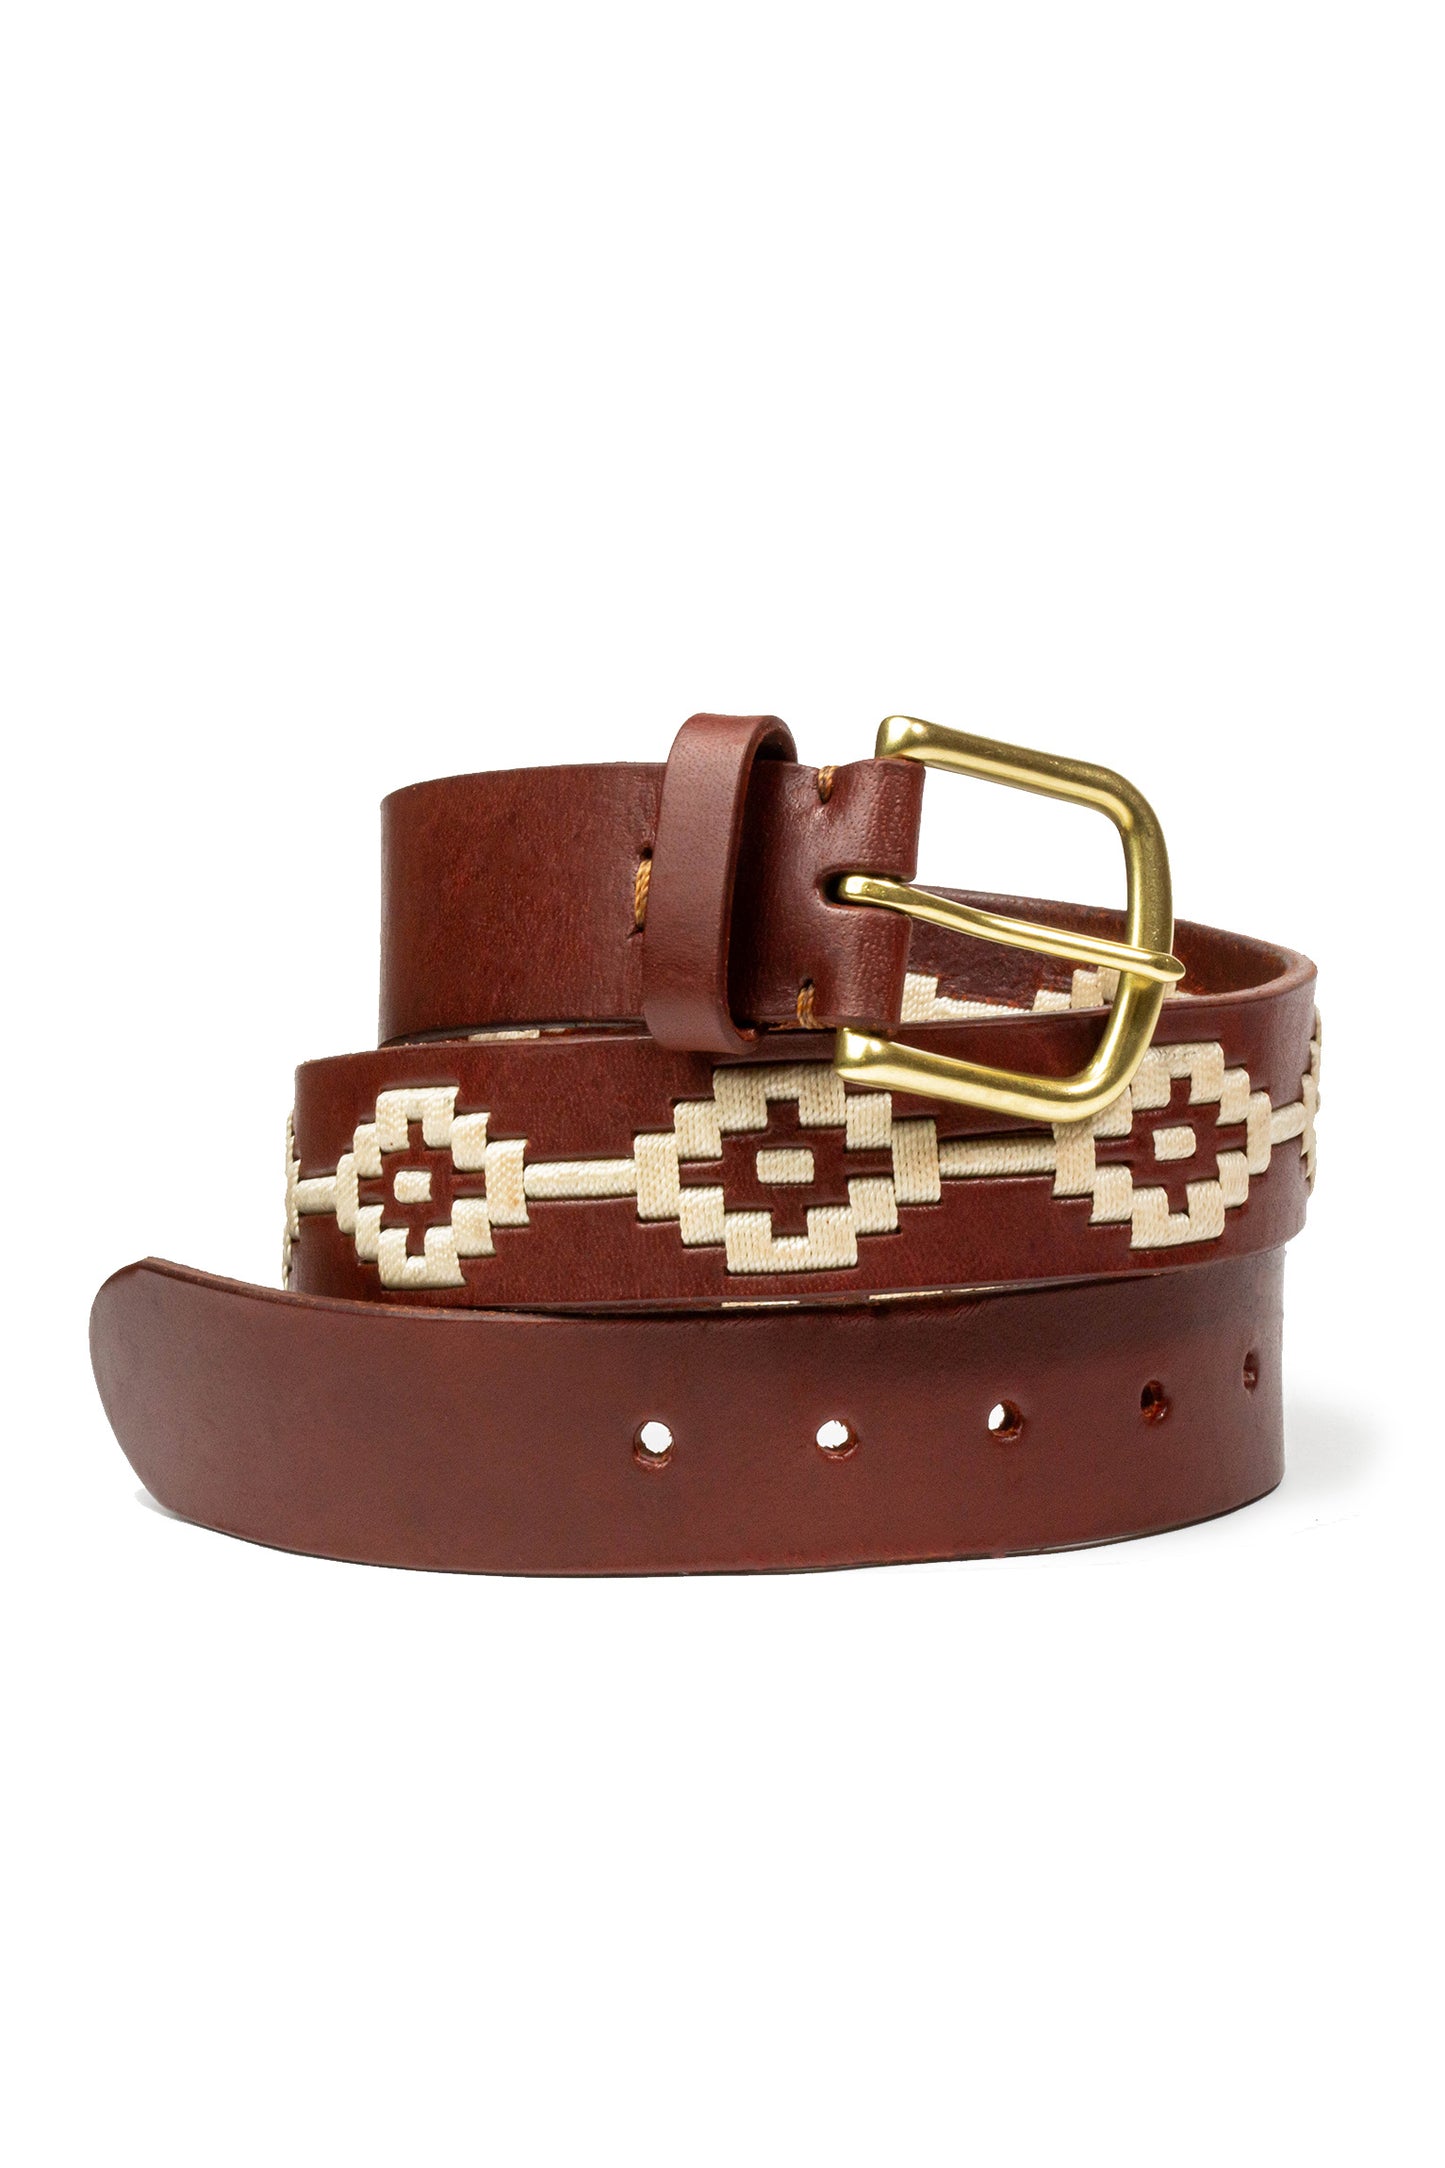 Piton Leather Handcrafted Belt